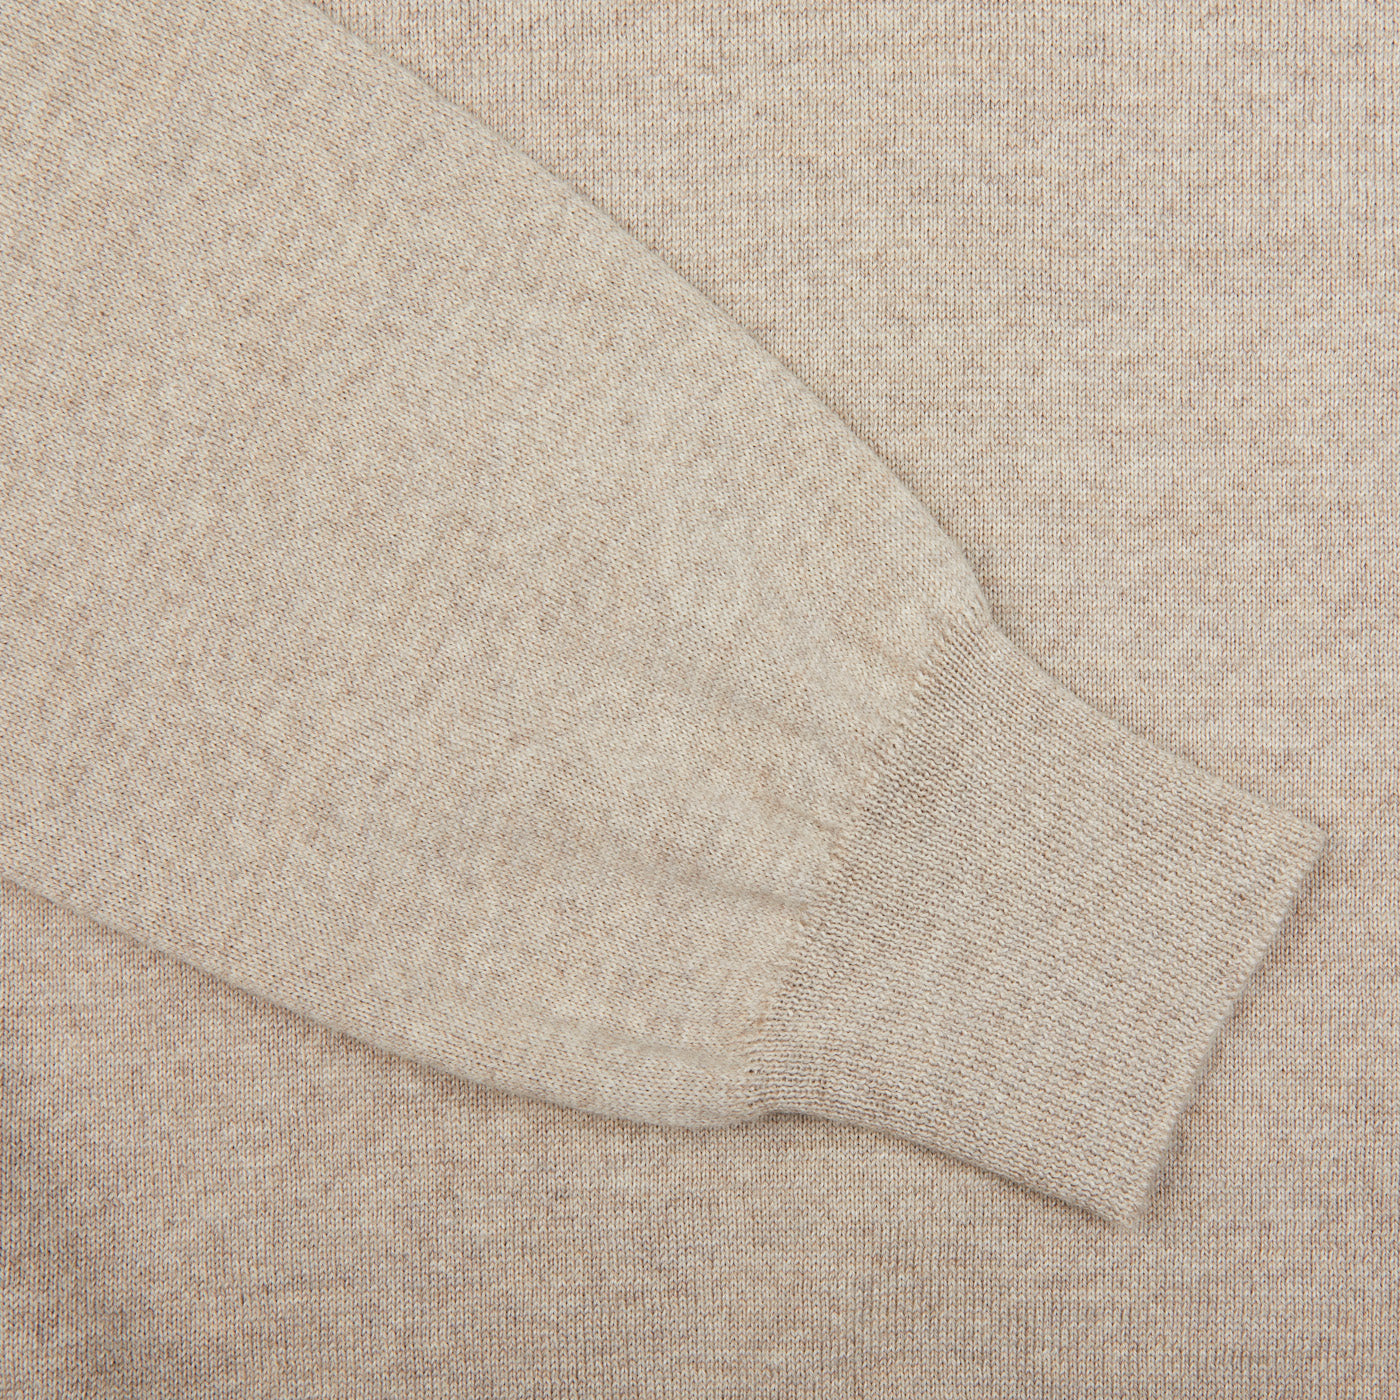 A close up of a Light Beige Merino Wool One-Piece Collar Polo Shirt, designed by Gran Sasso.